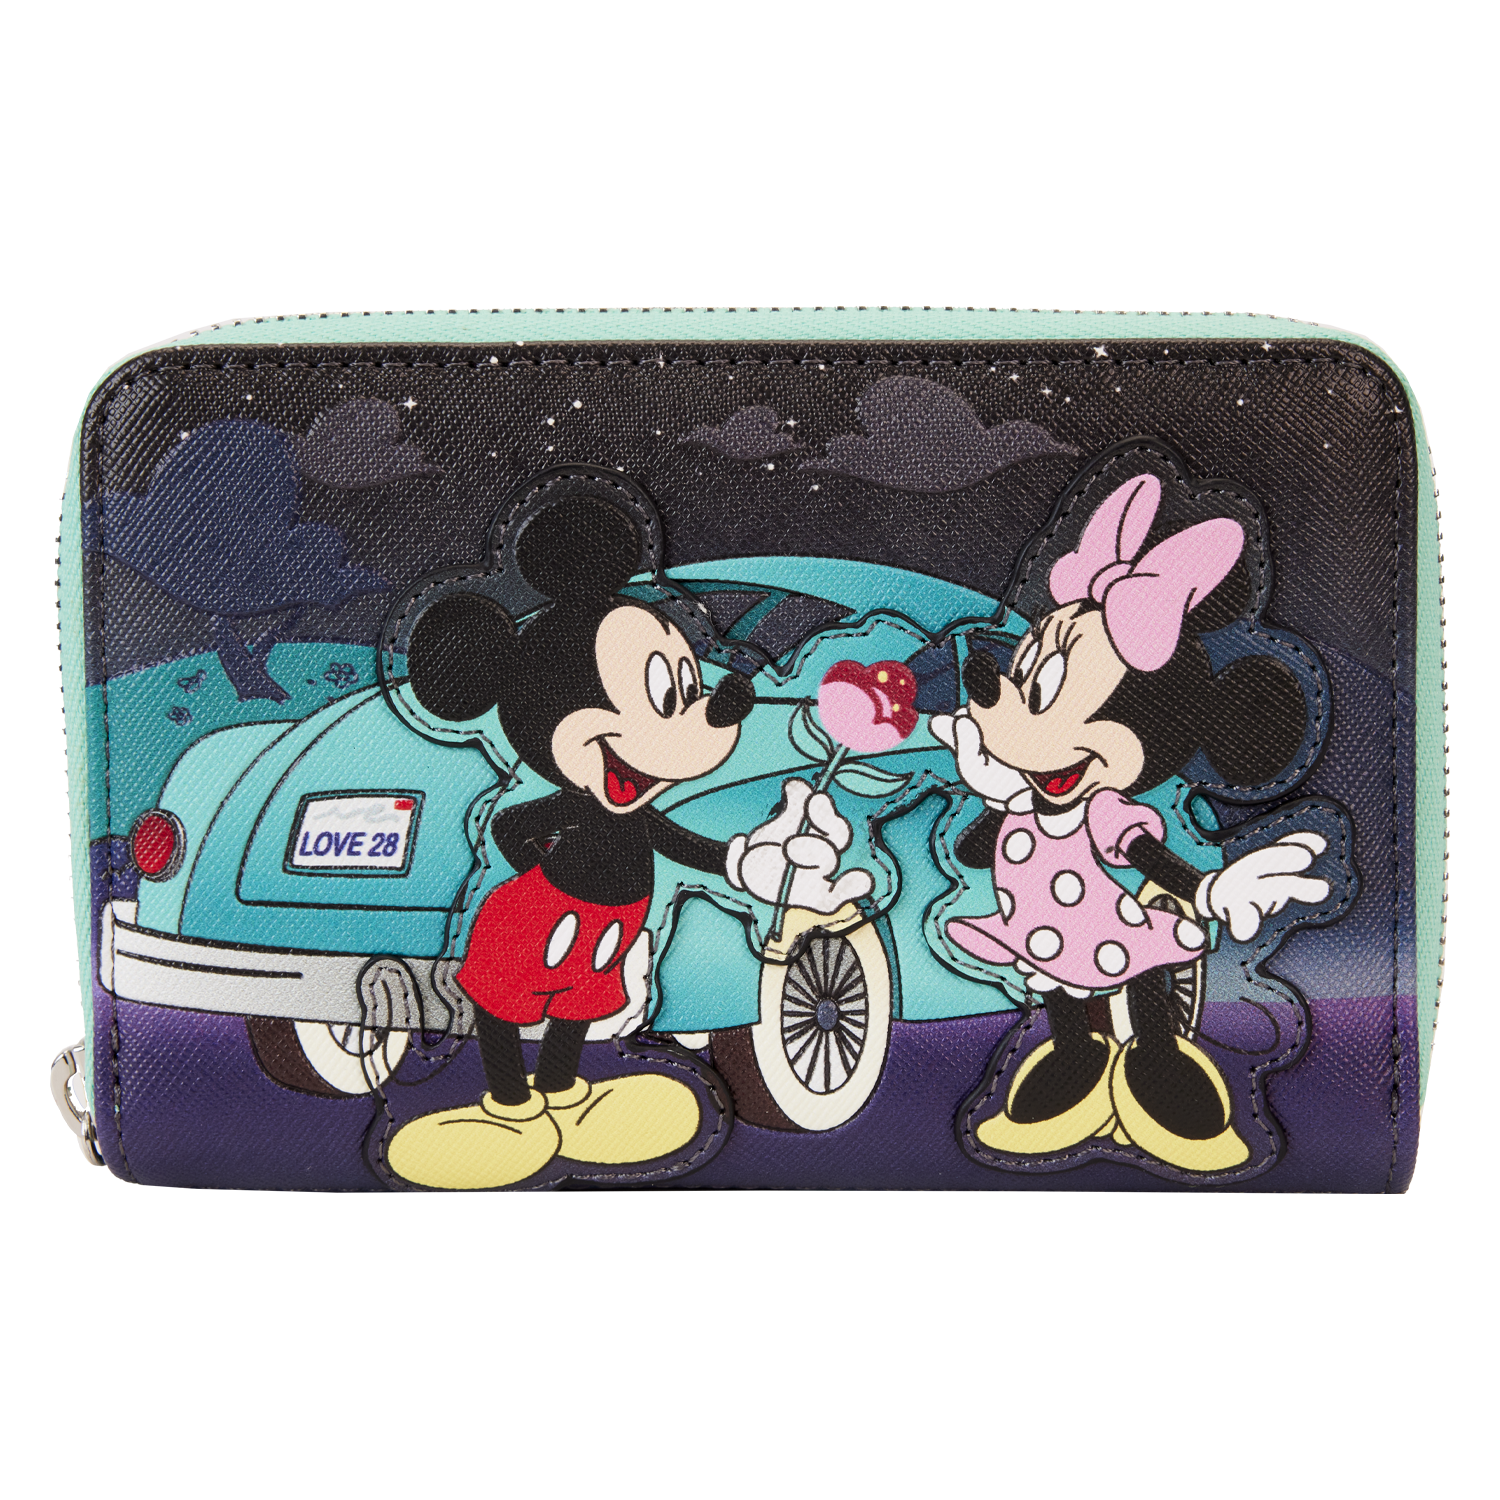 Buy Mickey & Minnie Date Night Drive-In Zip Around Wallet at